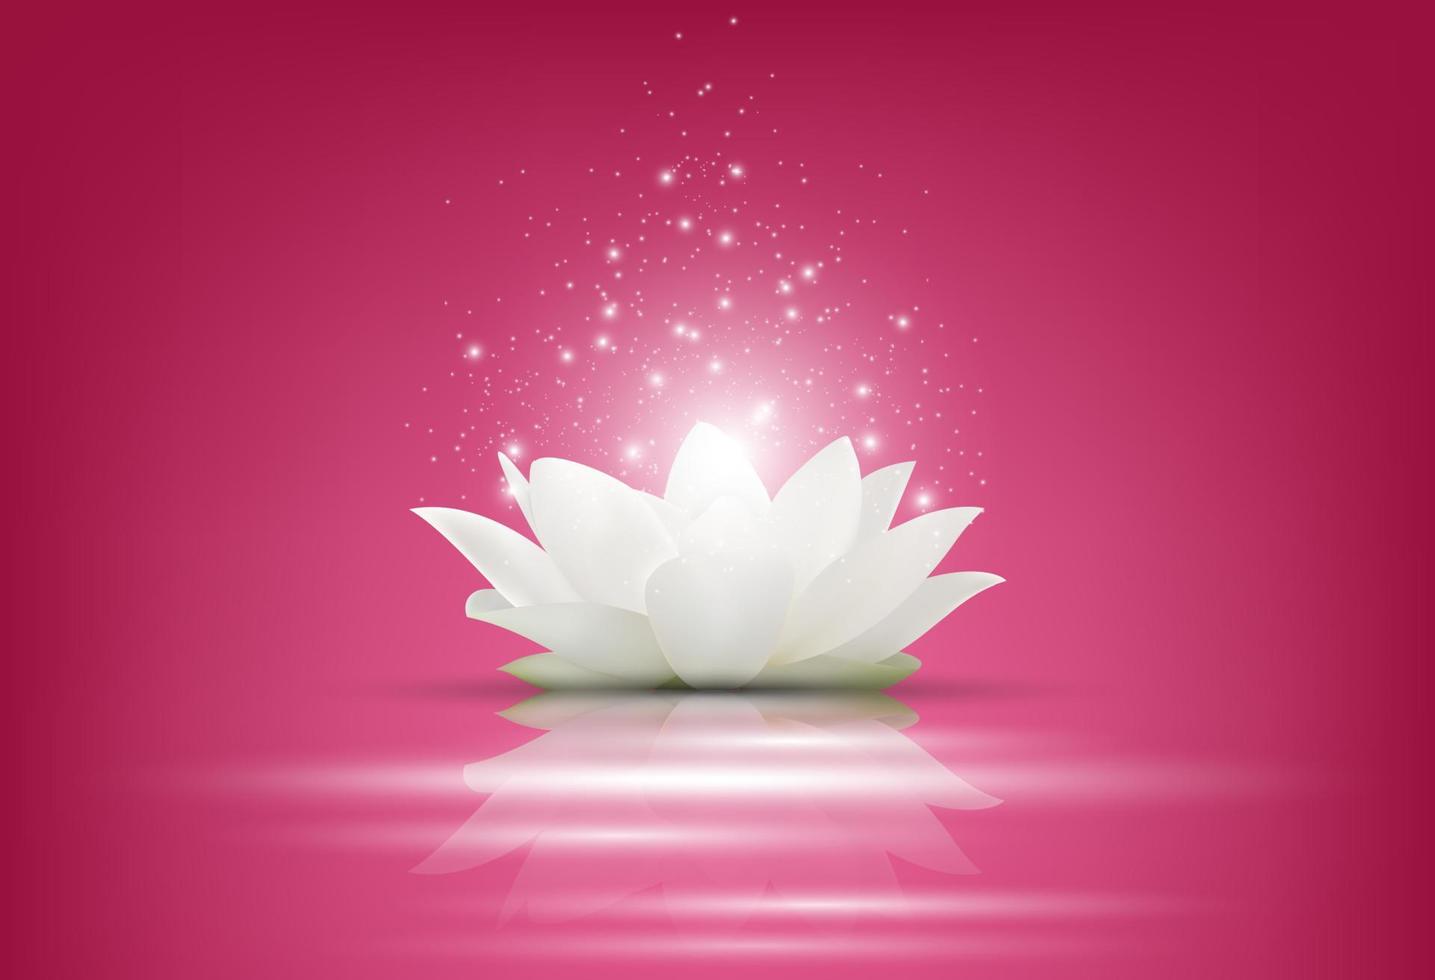 Magic White Lotus flower on pink background.Vector vector